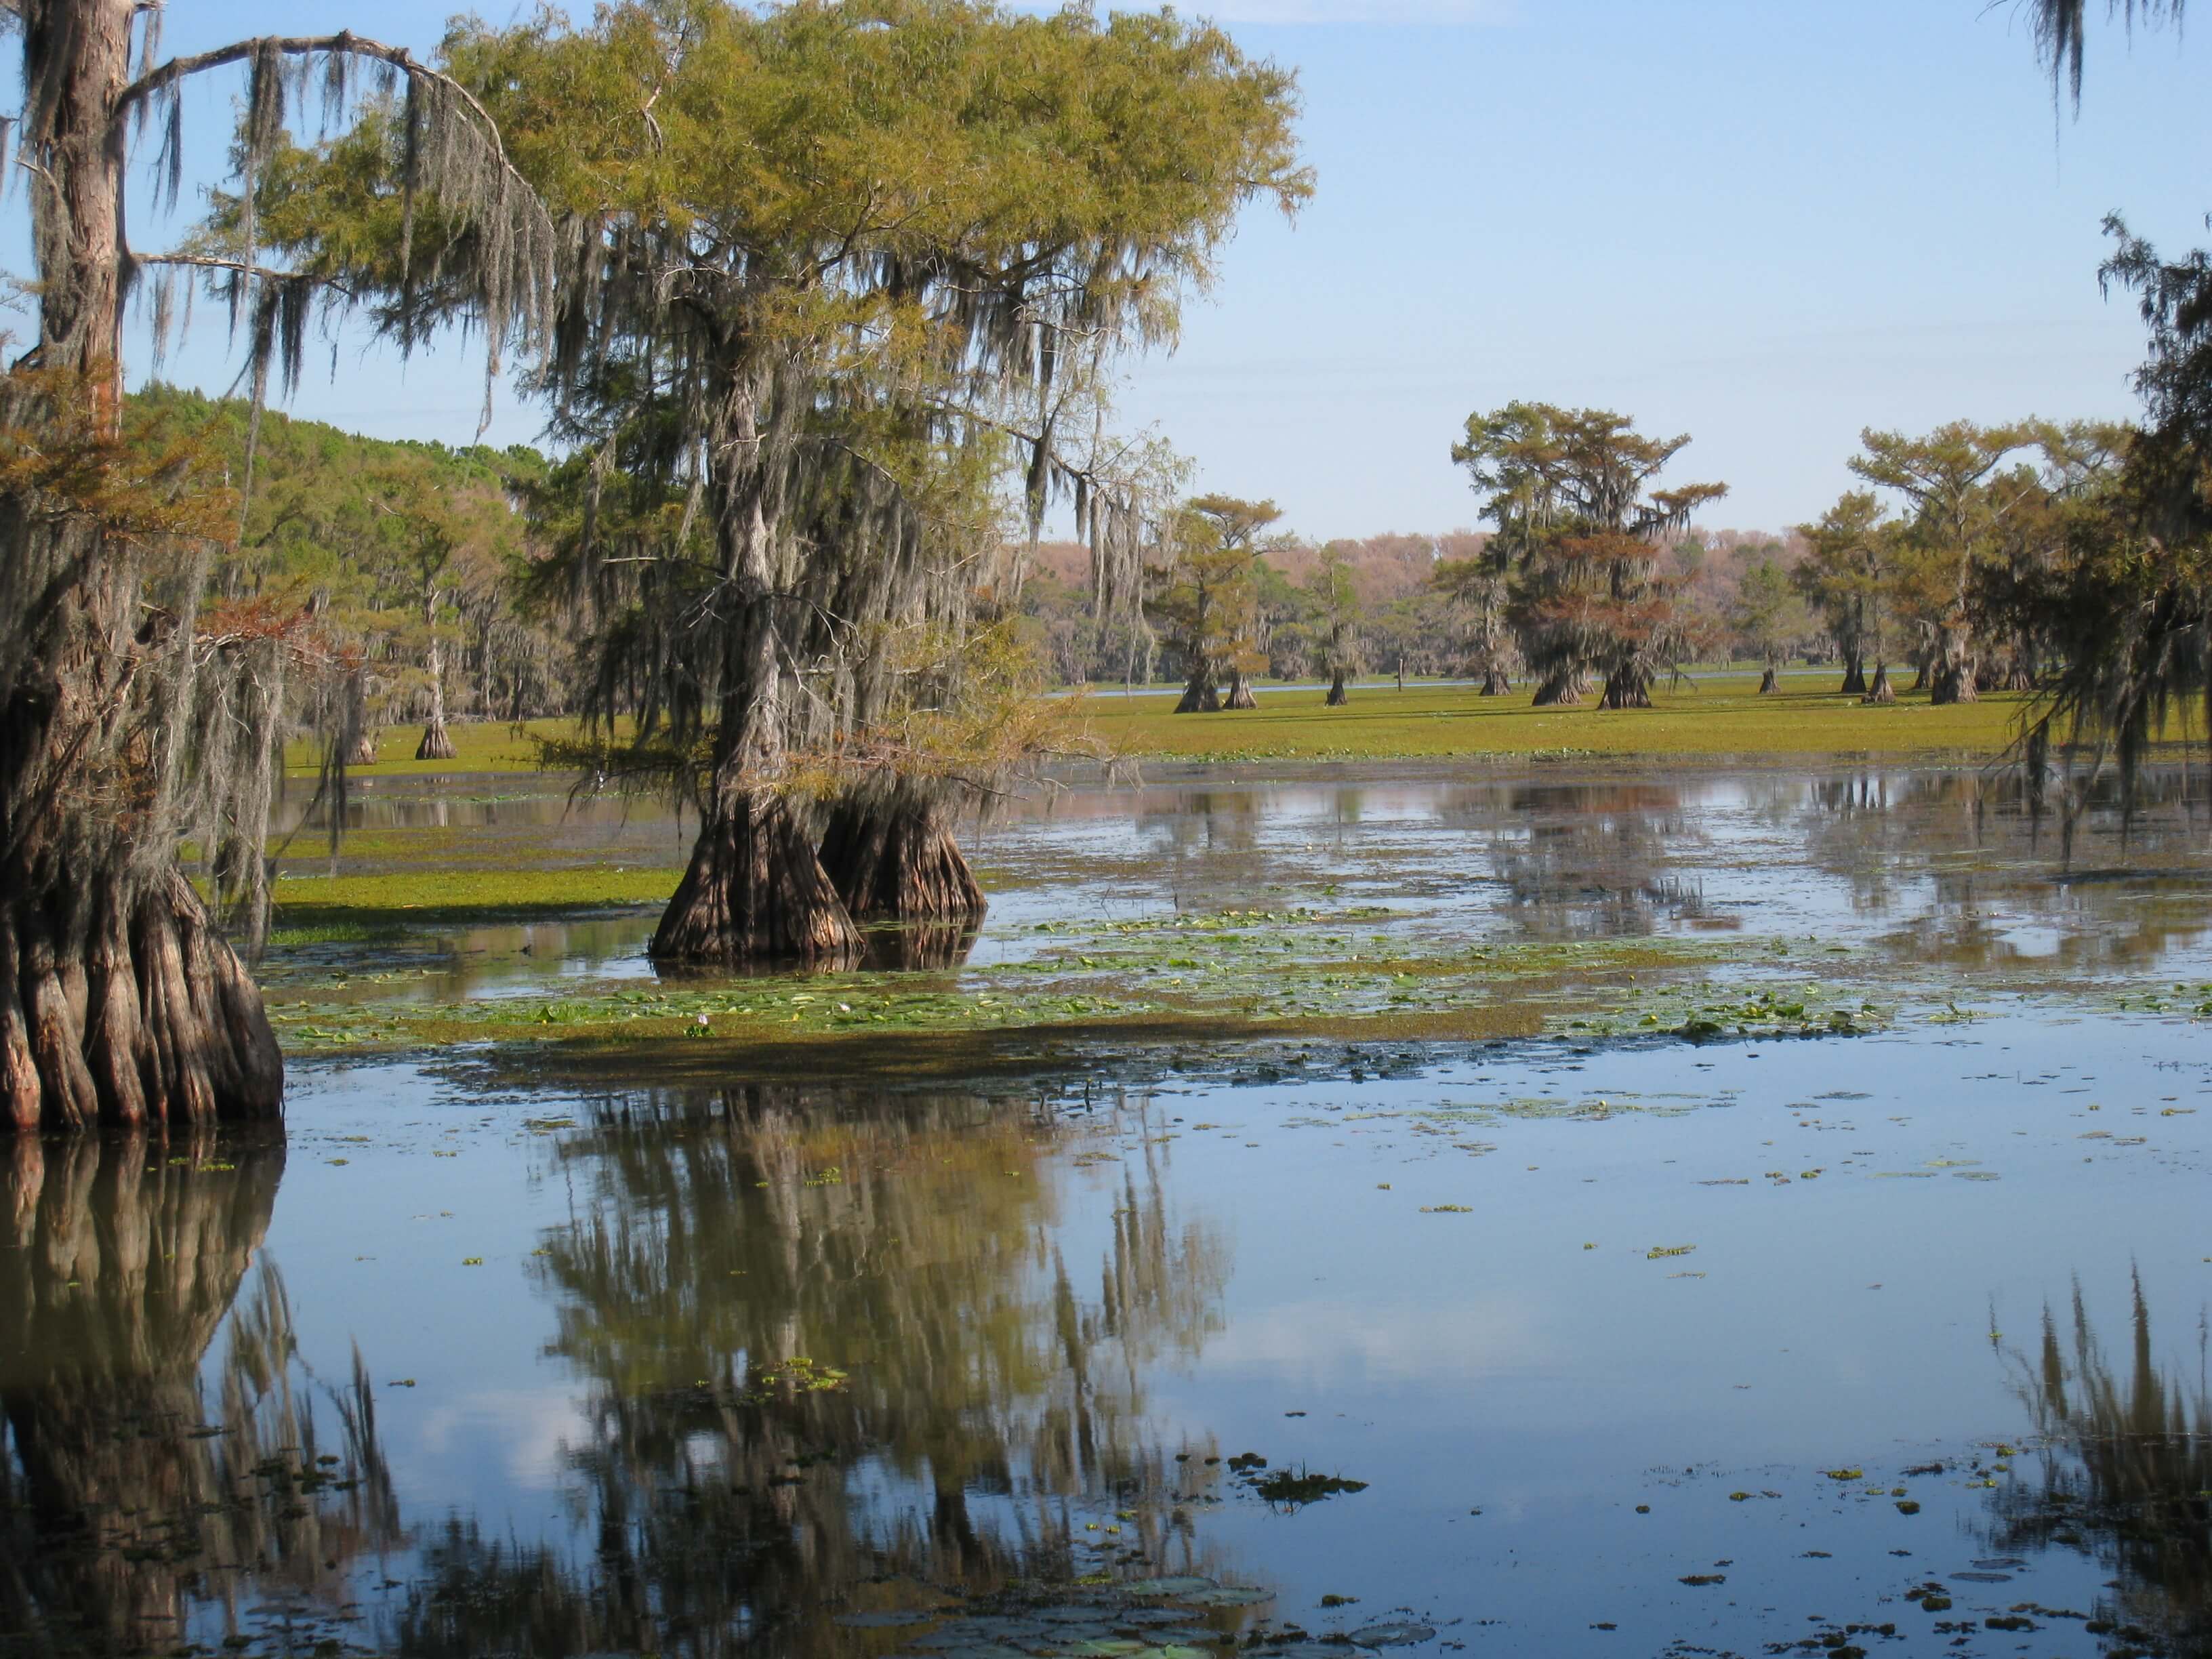 The Big Cypress/Caddo Sustainable Rivers project involves Caddo Lake, located in Northeast Texas, and its contributing tributaries and associated wetlands. The watershed is approximately 2,970 square miles, about a third of which is regulated by Lake o’ the Pines and other upstream reservoirs.